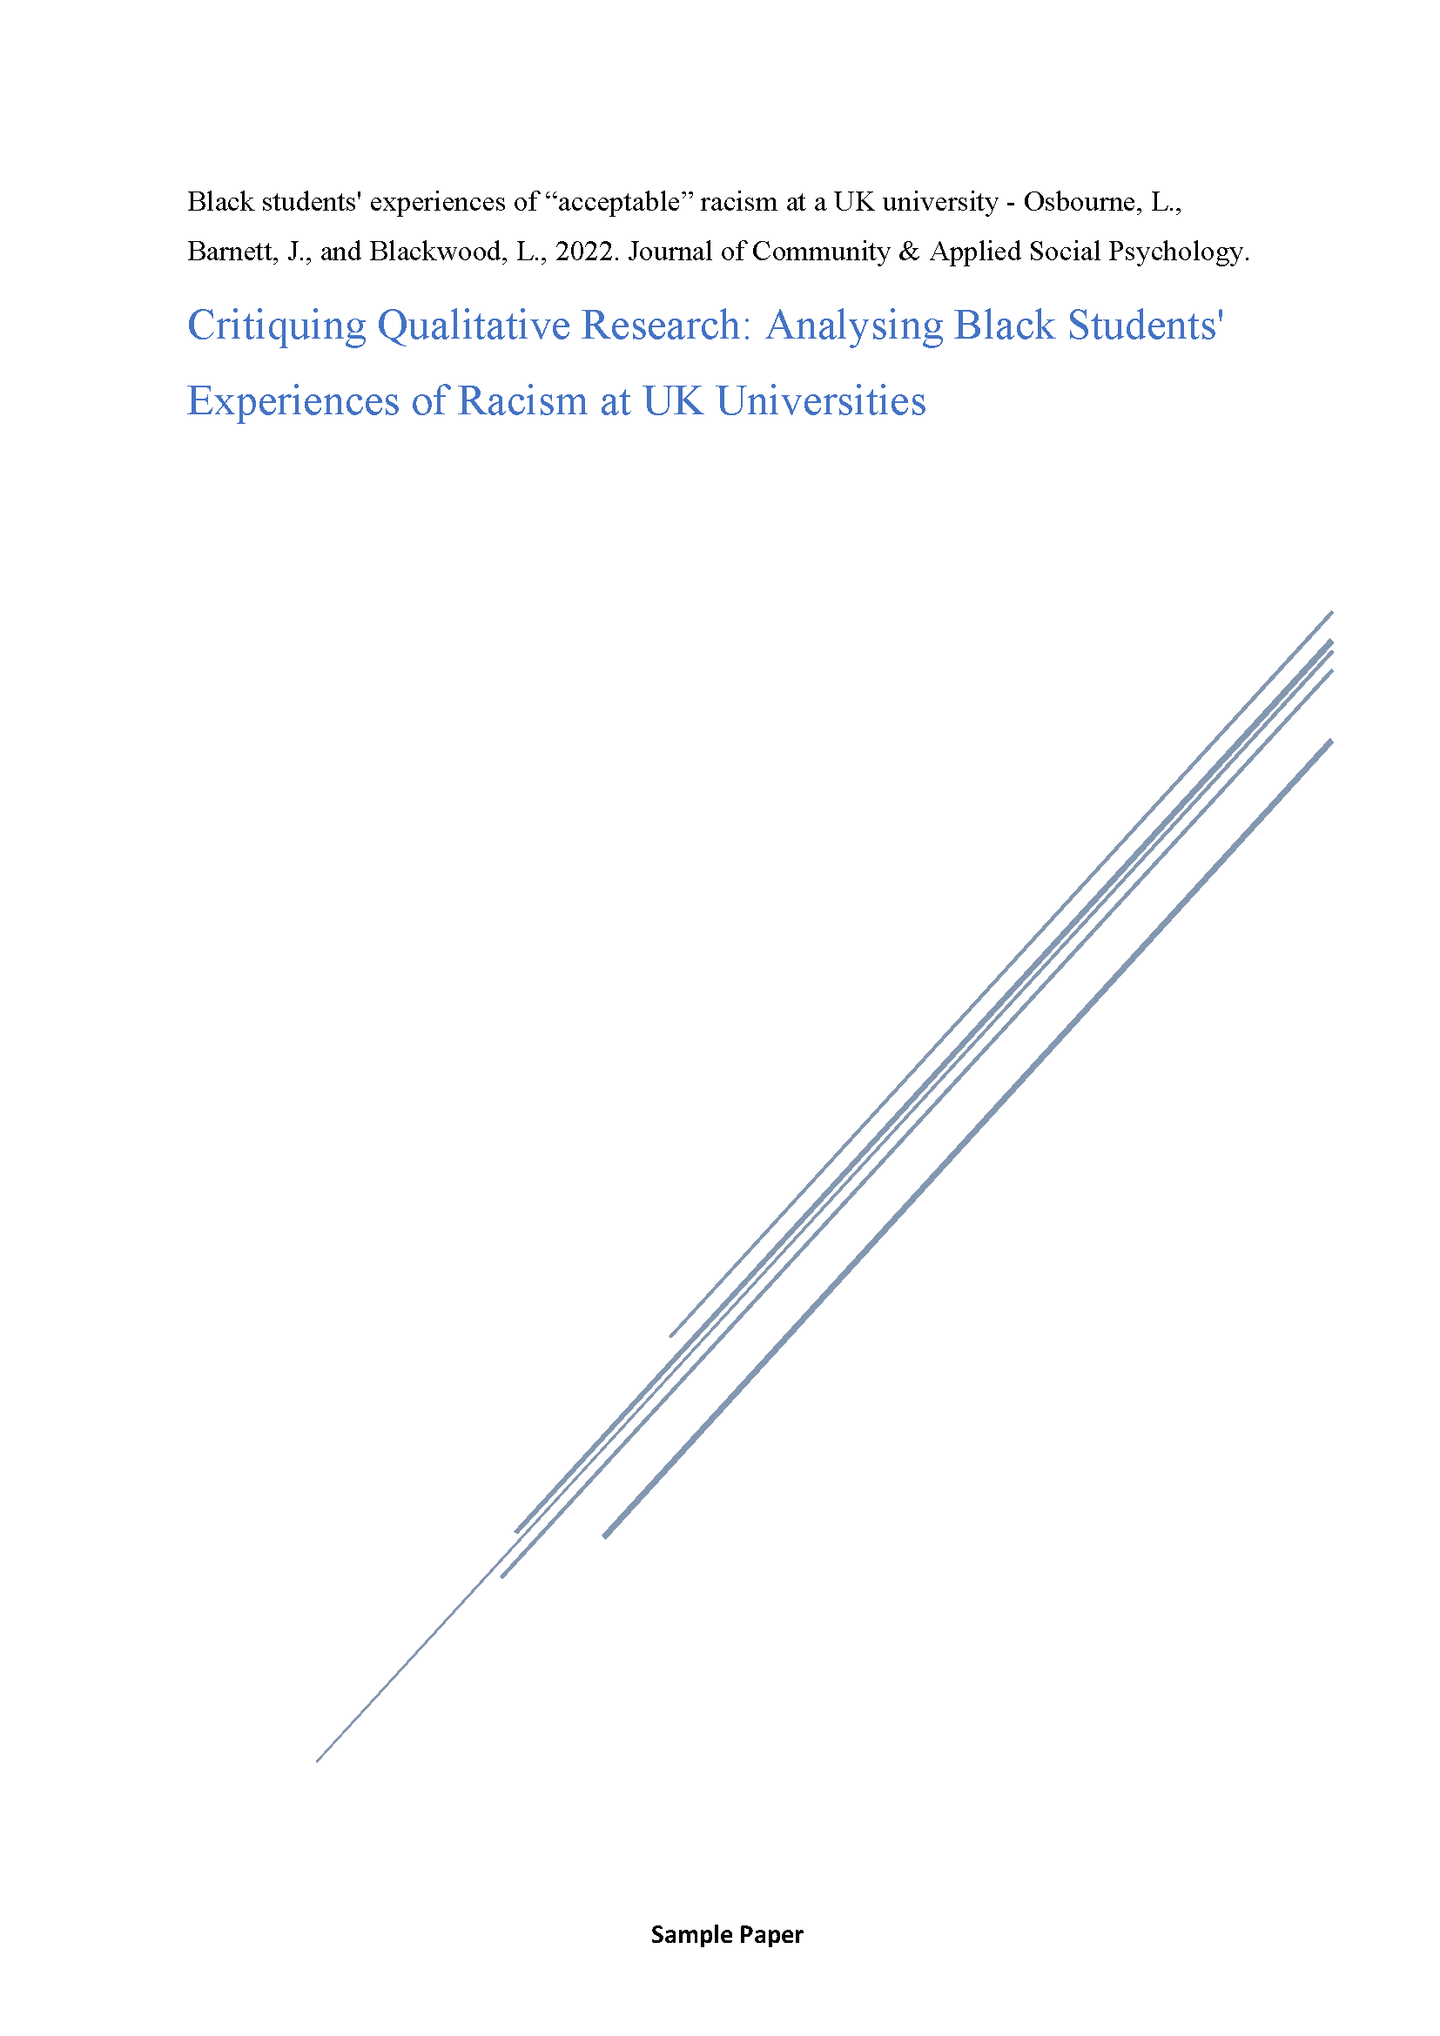 Sample Essay Paper - Critiquing Qualitative Research on Racism in UK Universities